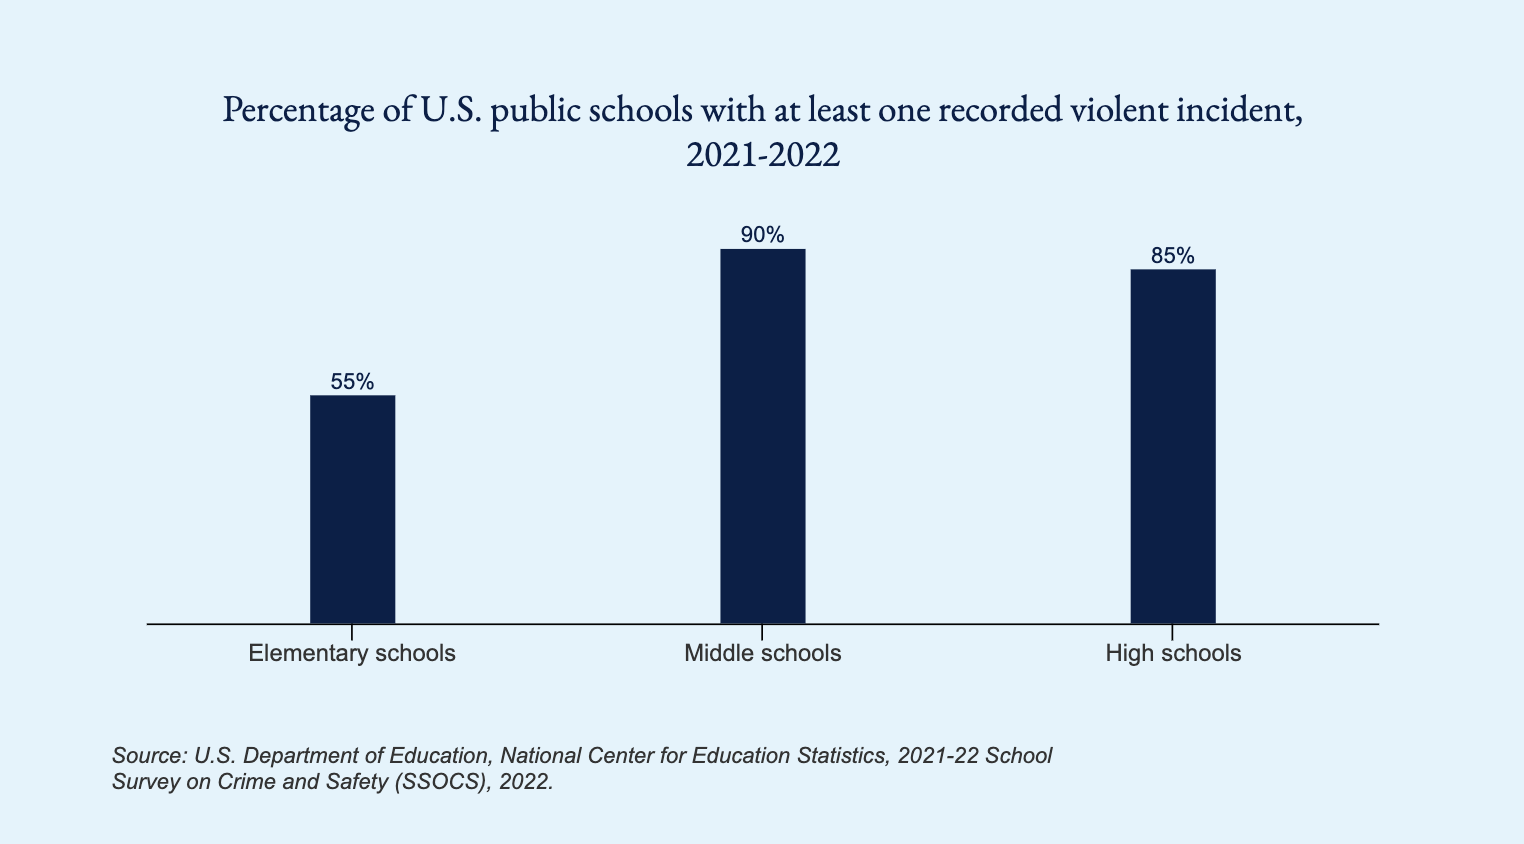 Graph showing percentage of U.S. public schools with at least one recorded violent incident in 2021-2022: 55% for elementary schools, 90% for middle schools, and 85% for high schools 